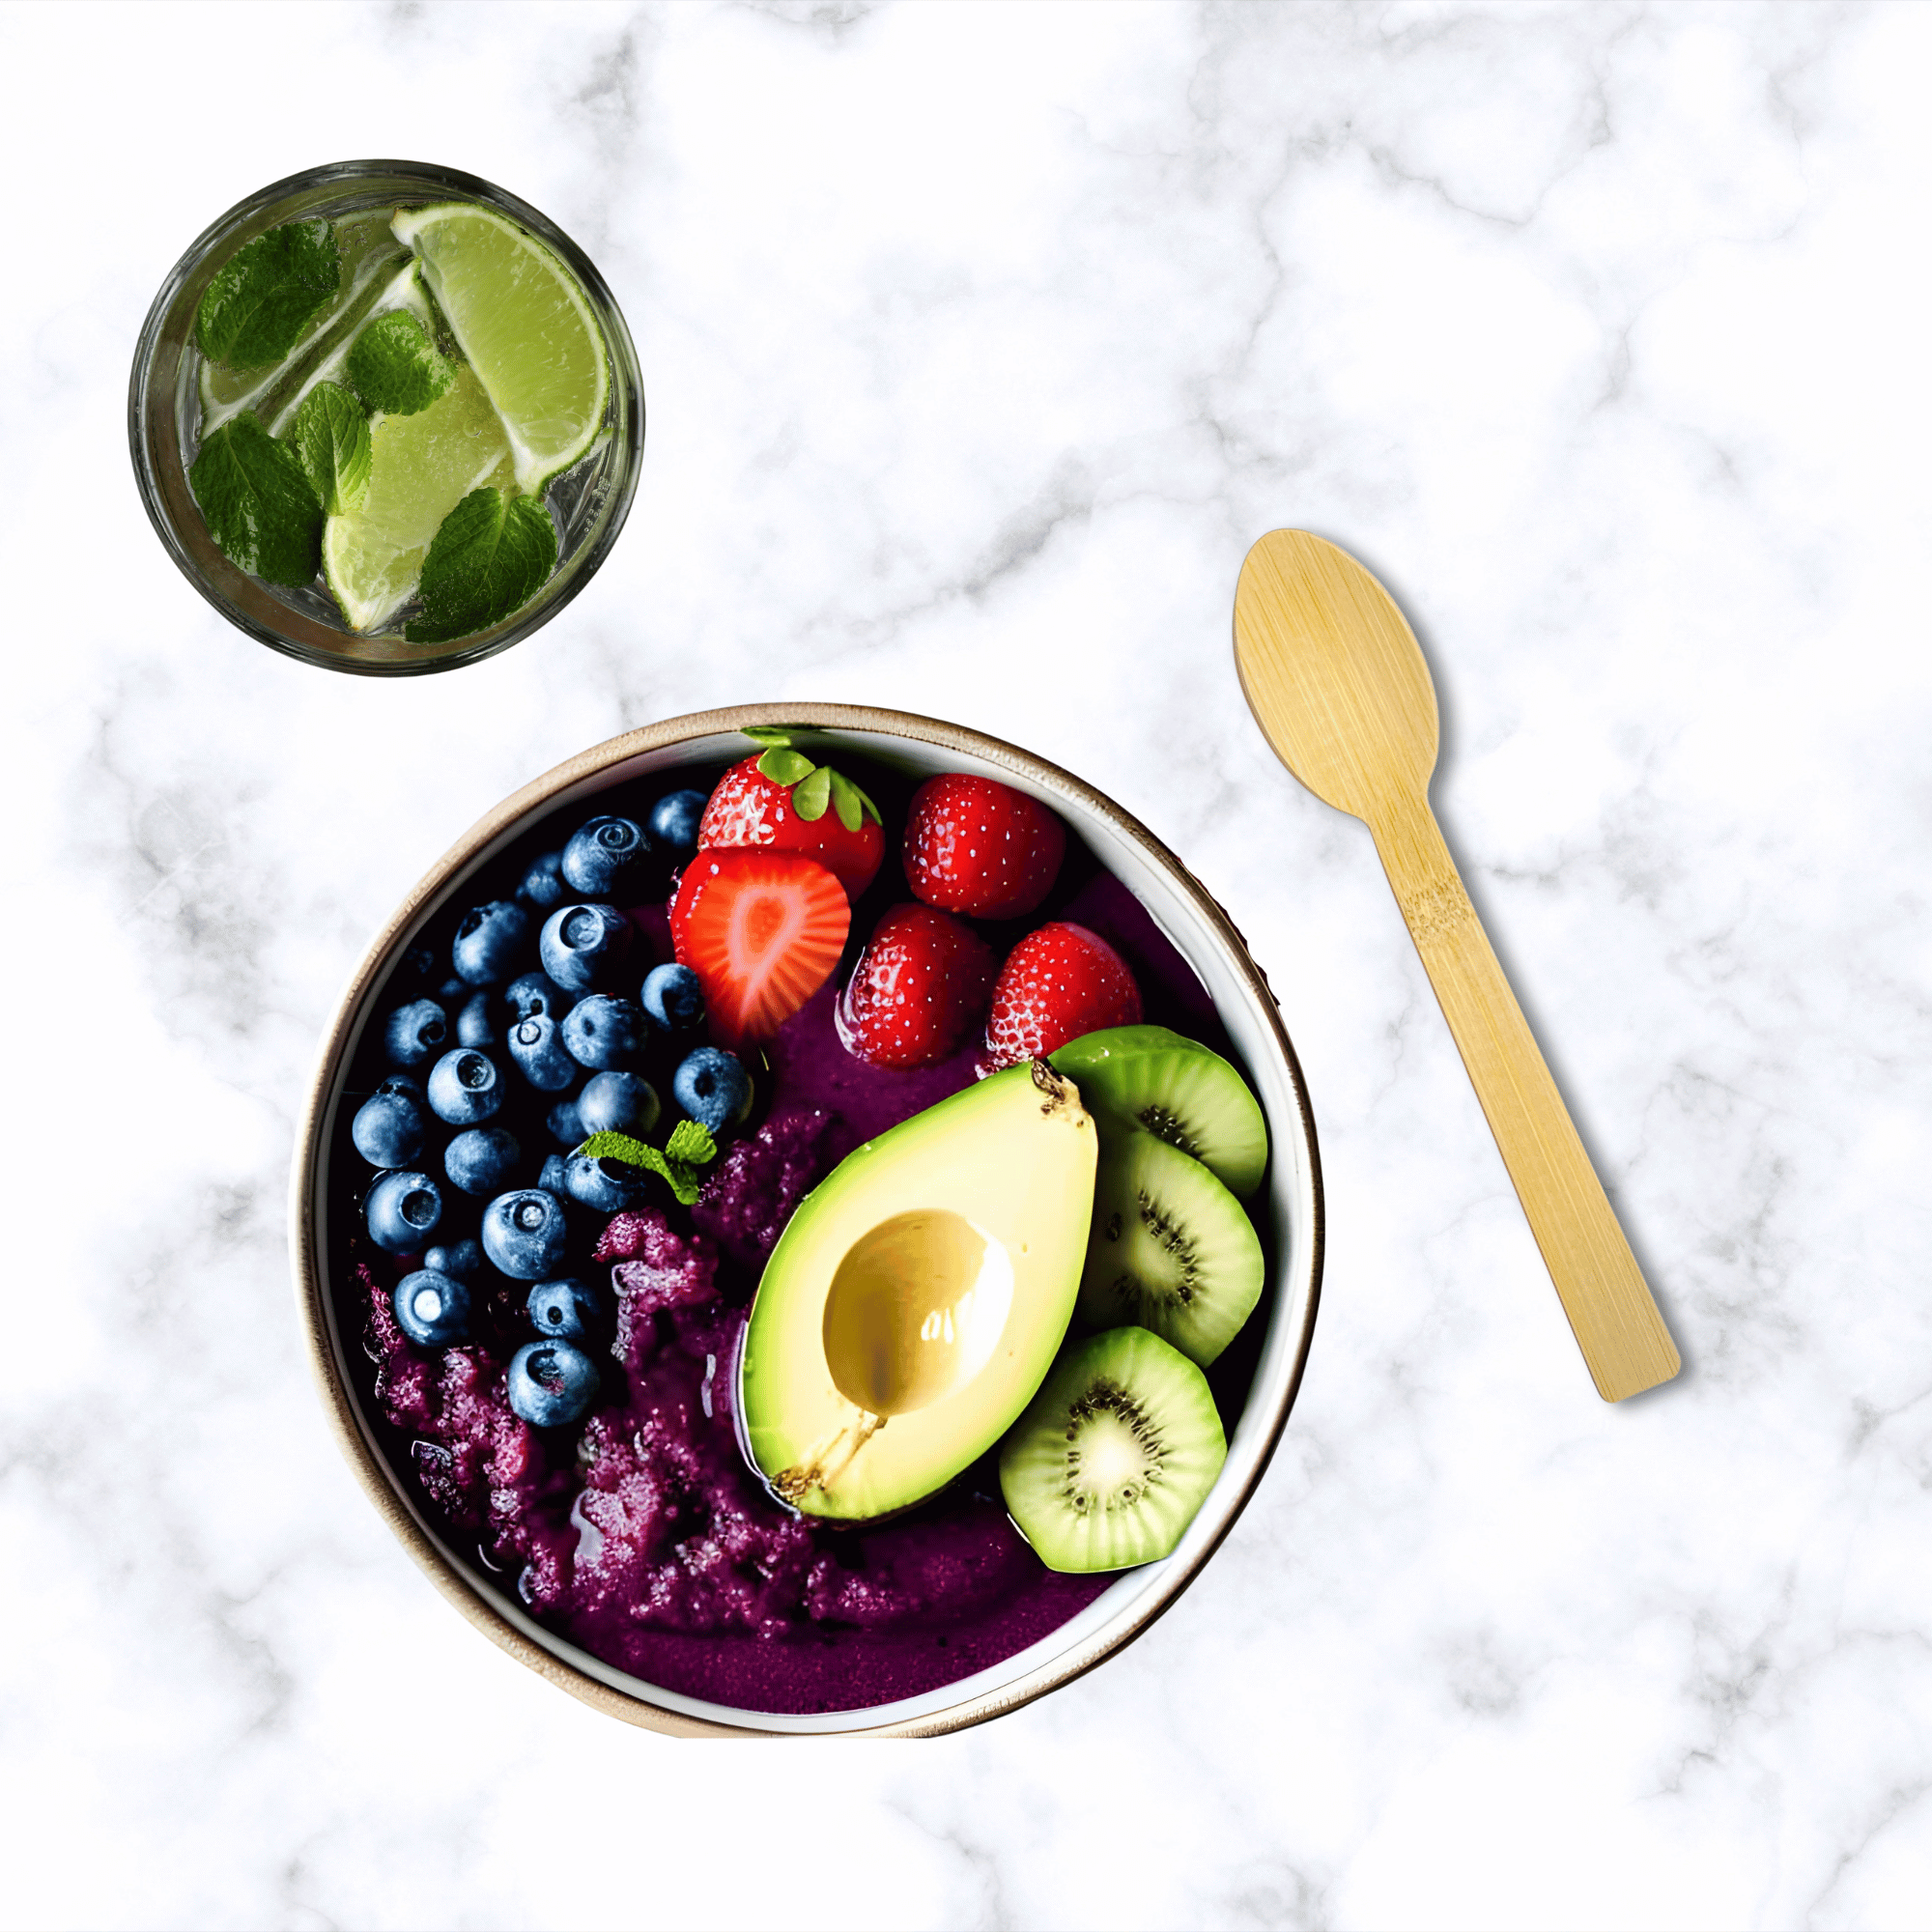 A refreshing acai bowl topped with sliced strawberries, blueberries, kiwi, and half an avocado, served next to an unwrapped bamboo spoon from Holy City Straw Co. A glass of lime-infused water with mint leaves is placed on a marble surface alongside the bowl.